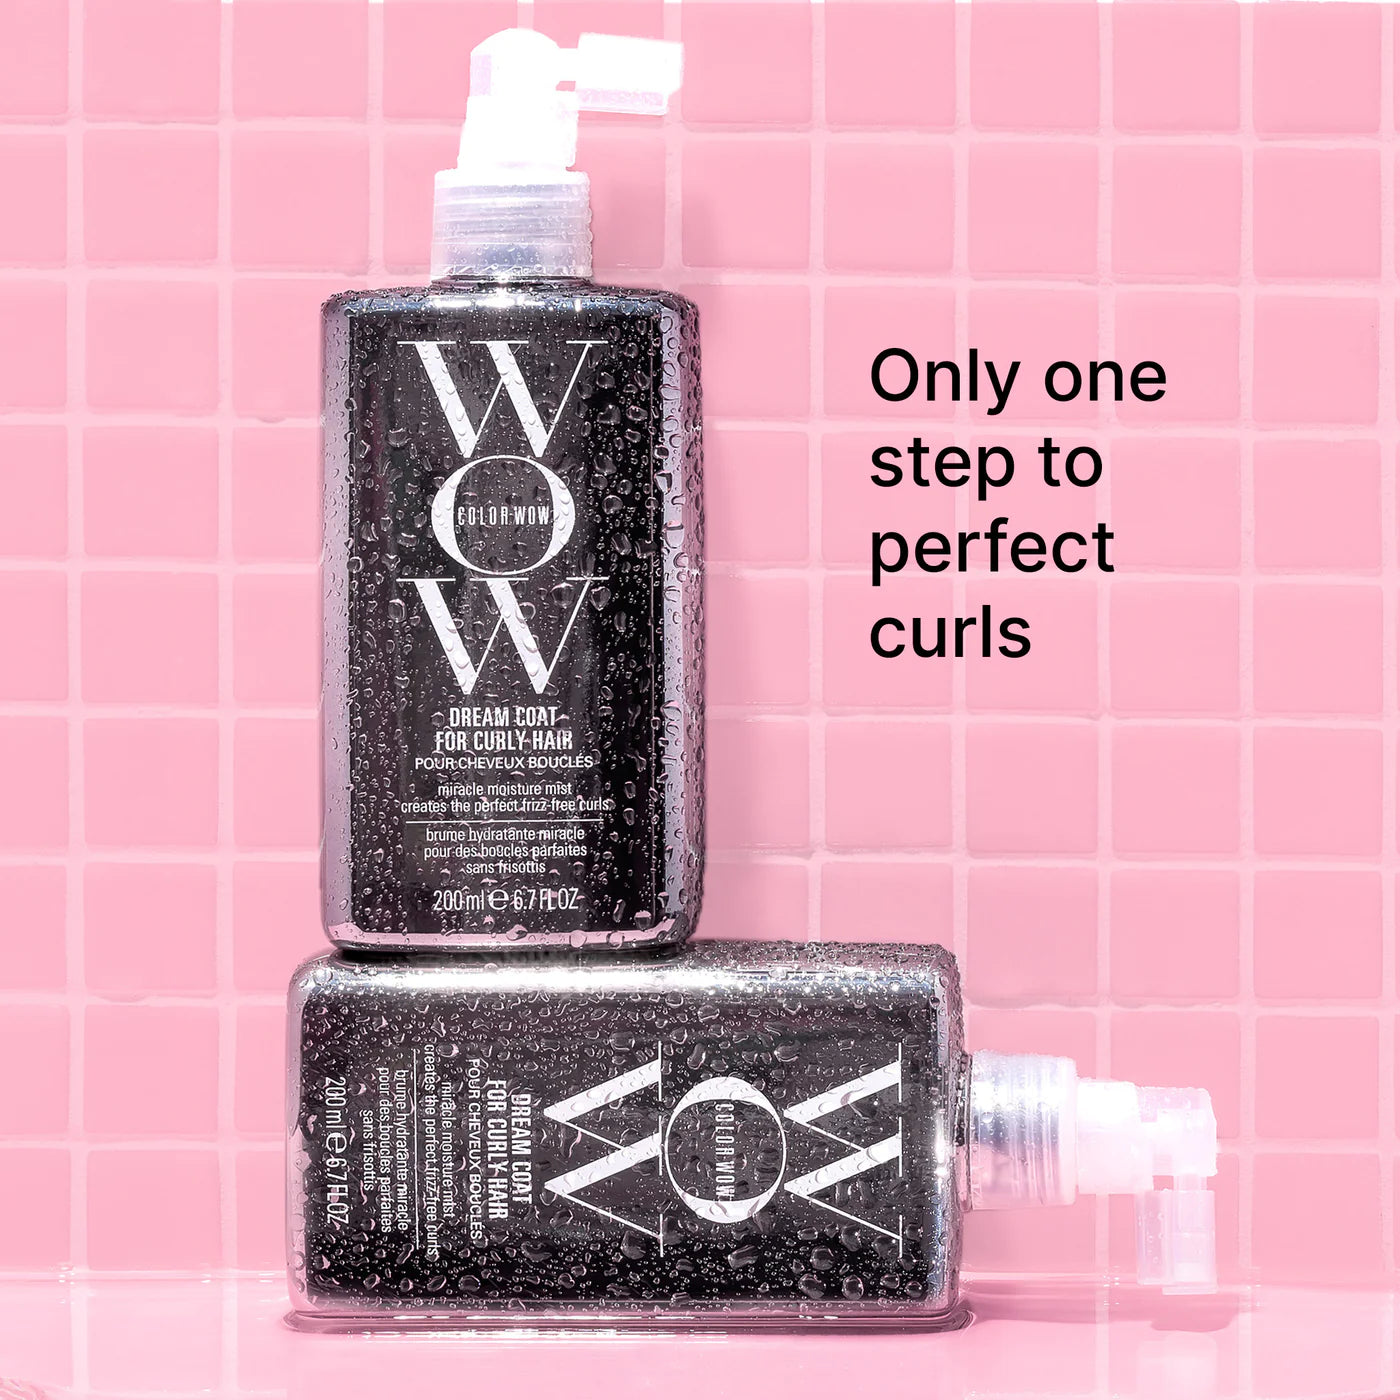 Curl Wow Dream Coat for Curly Hair